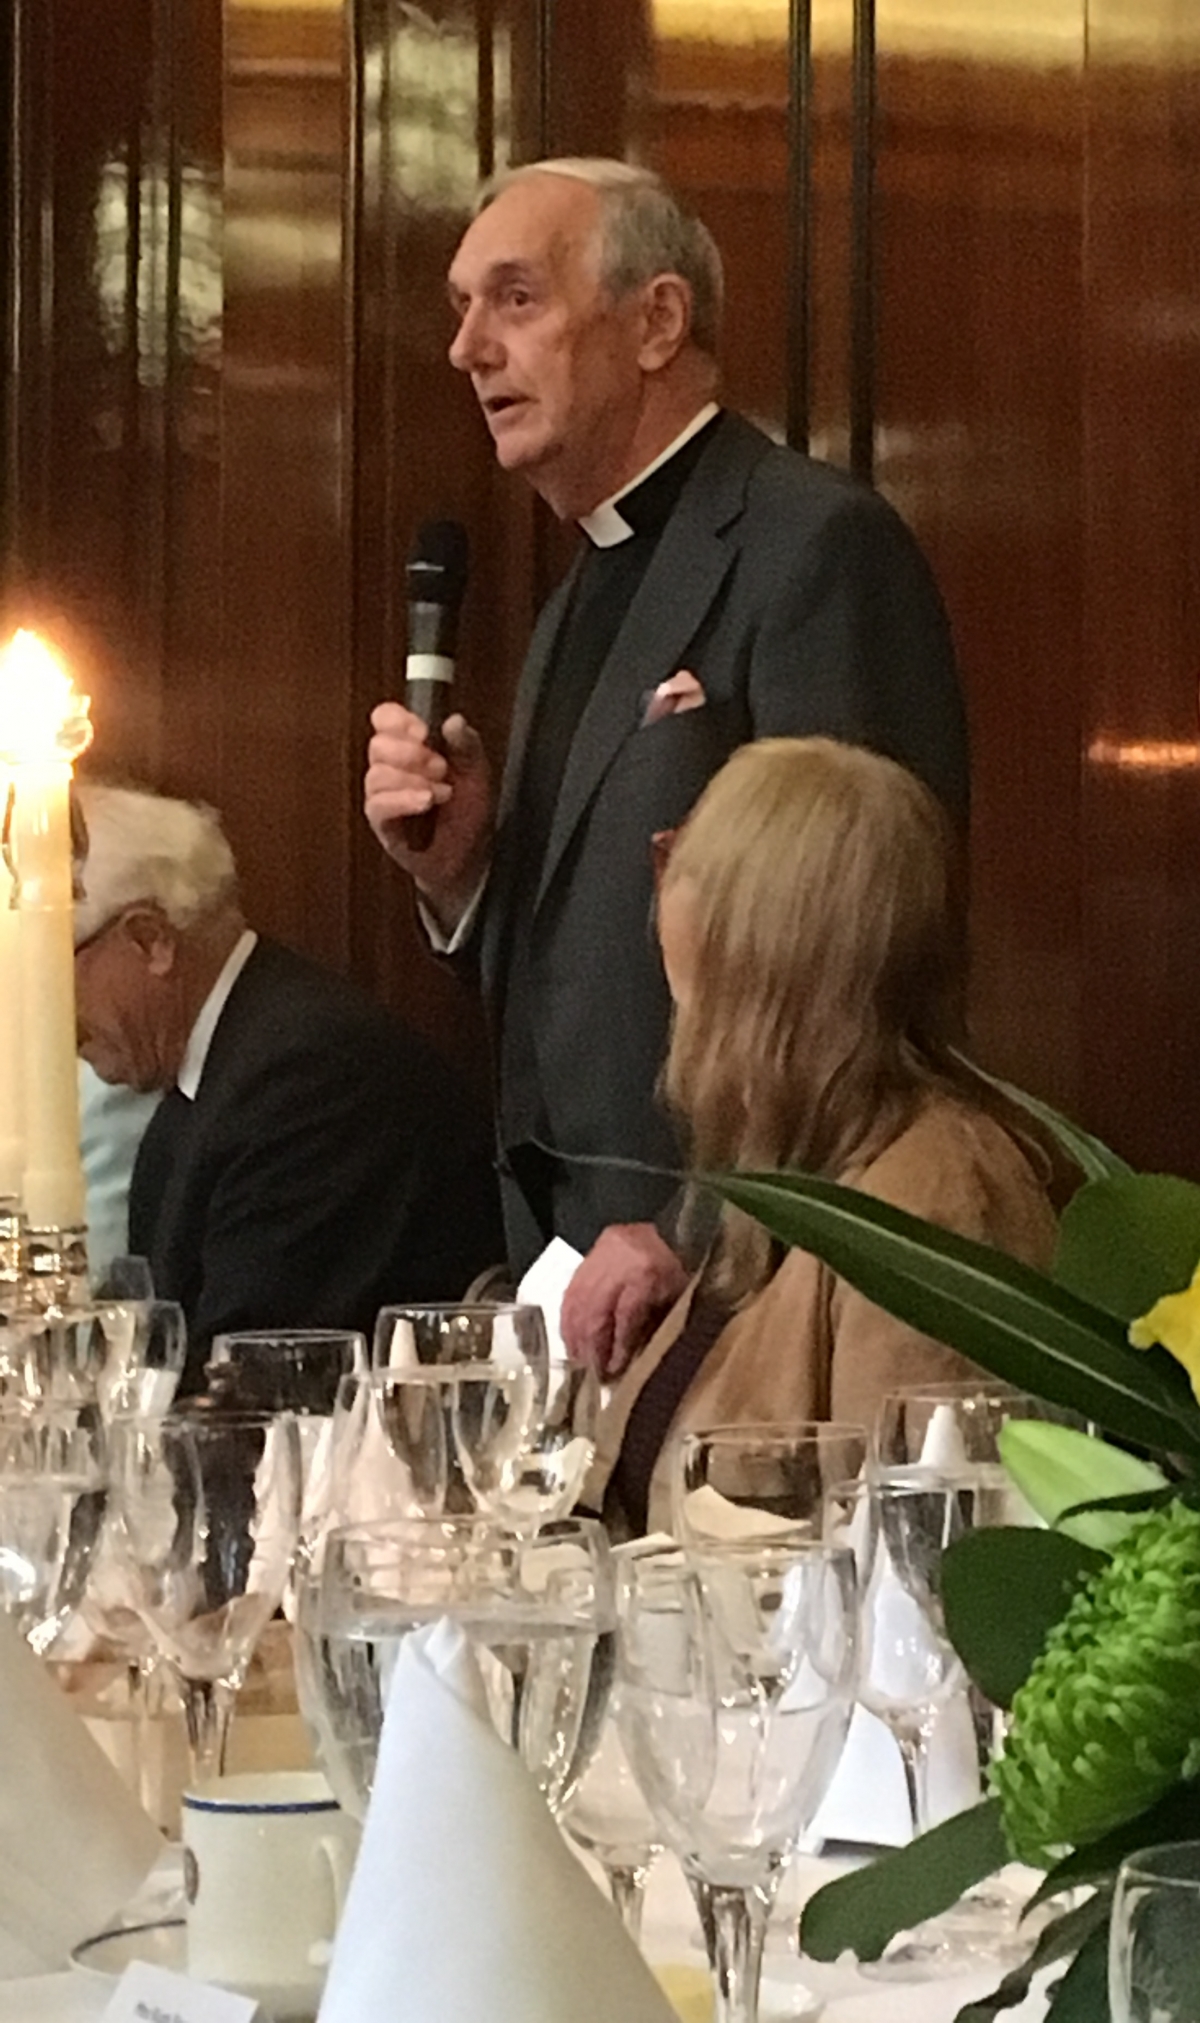 The Festival Dinner (Sons & Friends of the Clergy), Merchant Taylors' Hall 